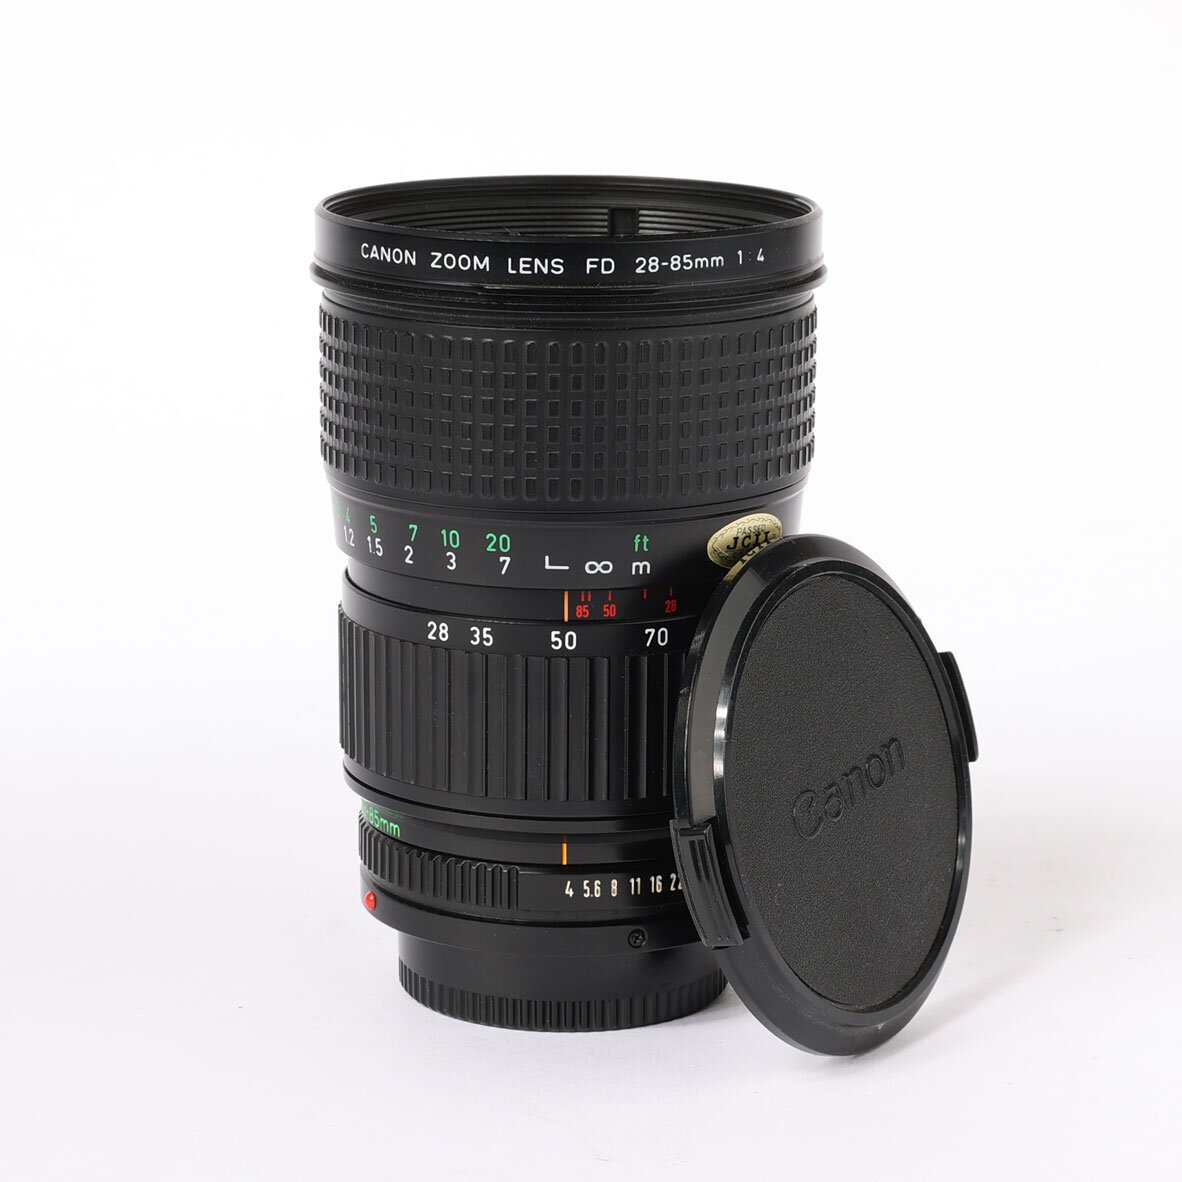 Canon Zoom Lens FD 28-85mm 4